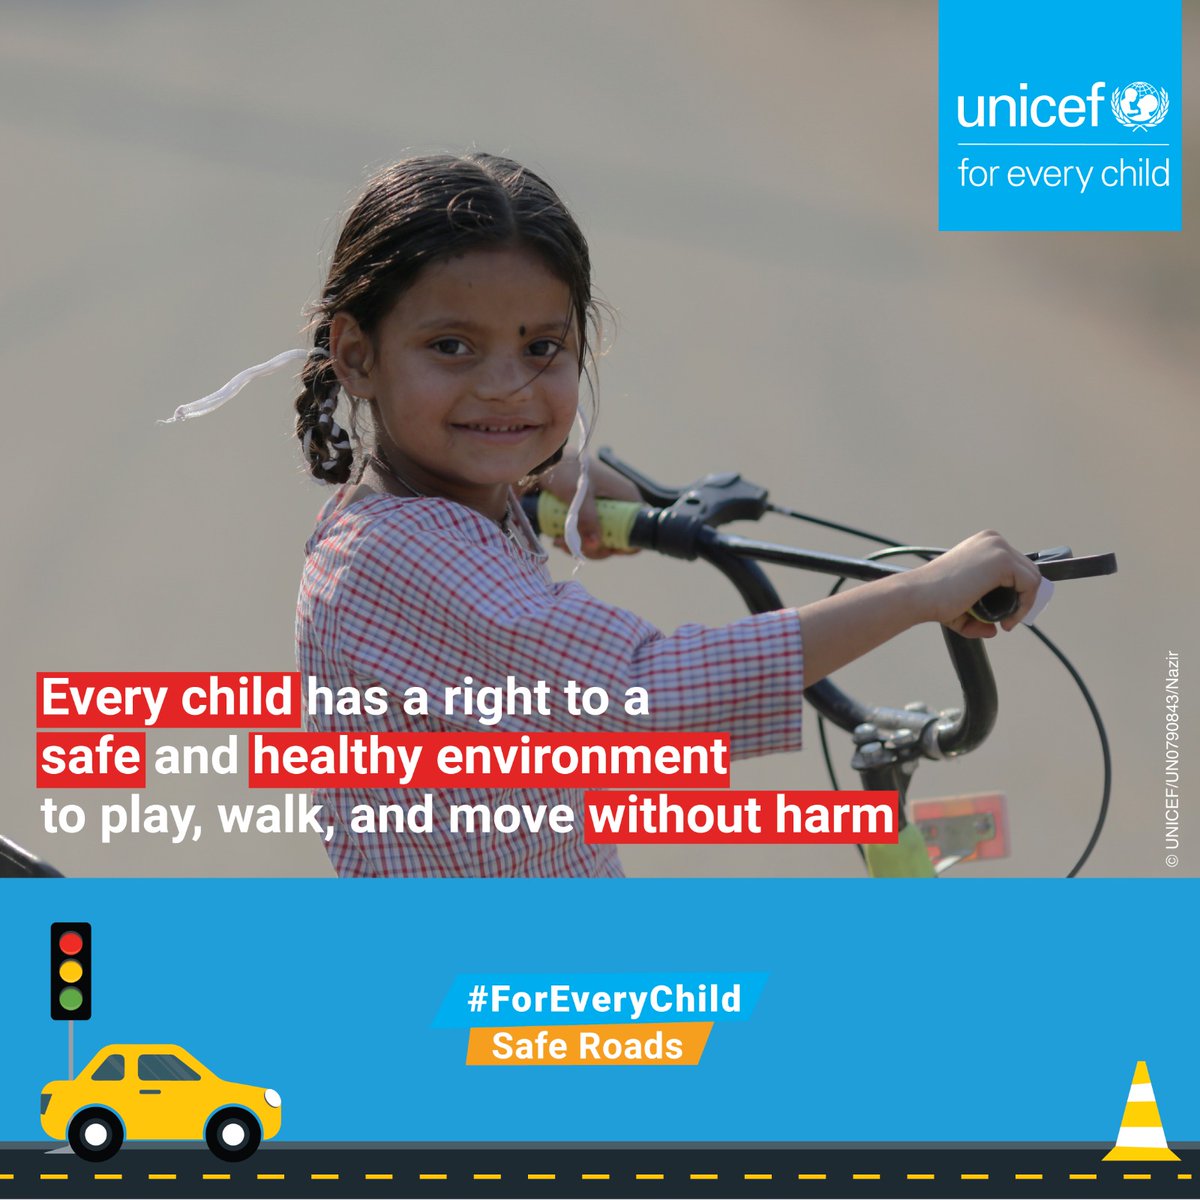 Safety must be at the core of our efforts to reimagine how we move in the world. Road safety solutions should be designed with the most at risk in mind first, like children and adolescents. #ForEveryChild, safe roads #RoadSafetyWeek